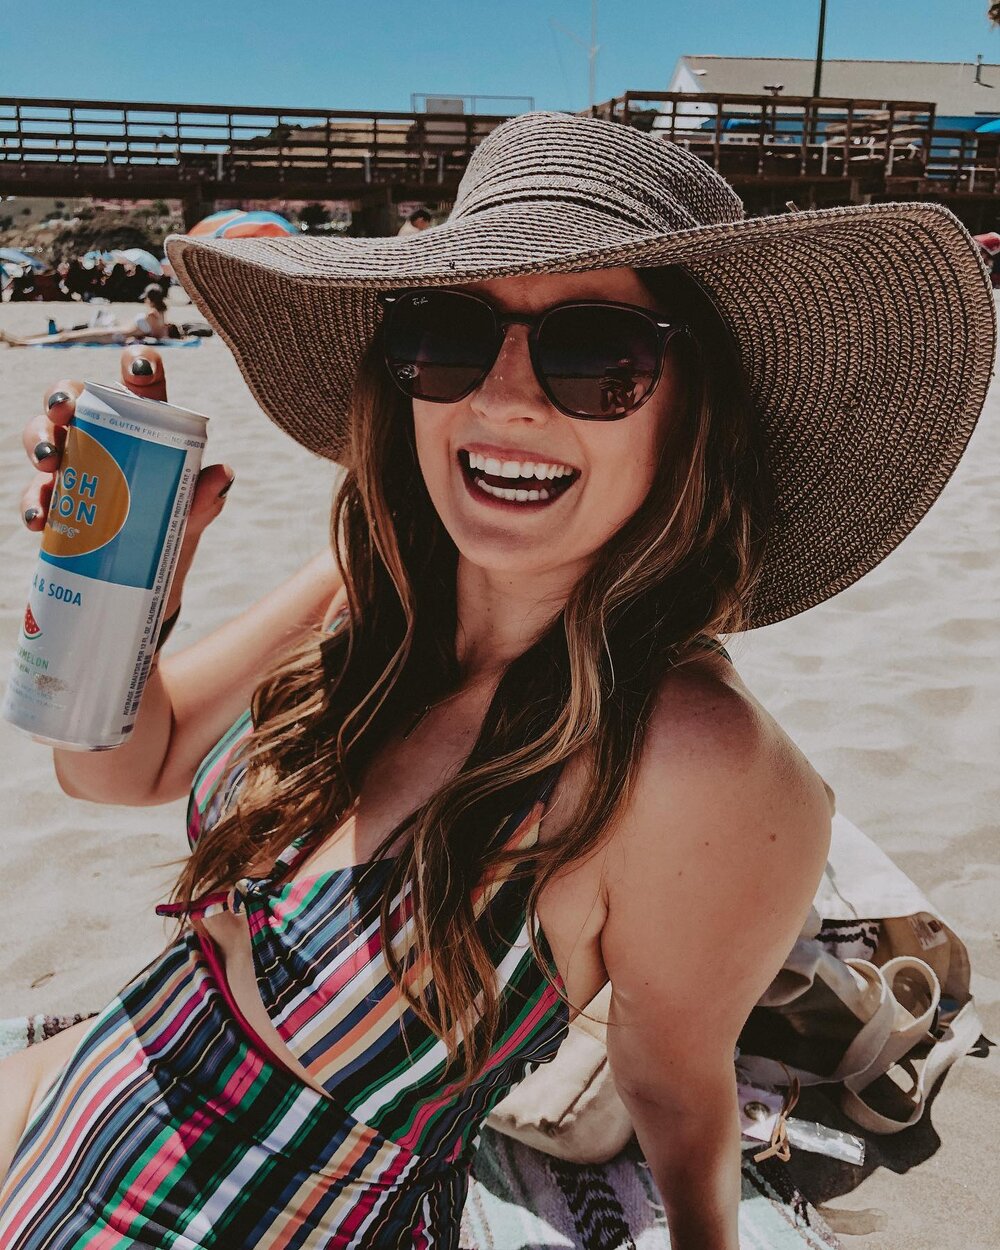 ARE YOU A SELTZER FAN? 🙋🏼&zwj;♀️

Okay, I&rsquo;ll admit&hellip; I&rsquo;ve tried 𝒓𝒆𝒂𝒍𝒍𝒚 𝒓𝒆𝒂𝒍𝒍𝒚 hard to resist seltzers and choose wine over them🤷🏼&zwj;♀️. Yet, earlier this summer, I decided to be more open-minded and try a few.  Som